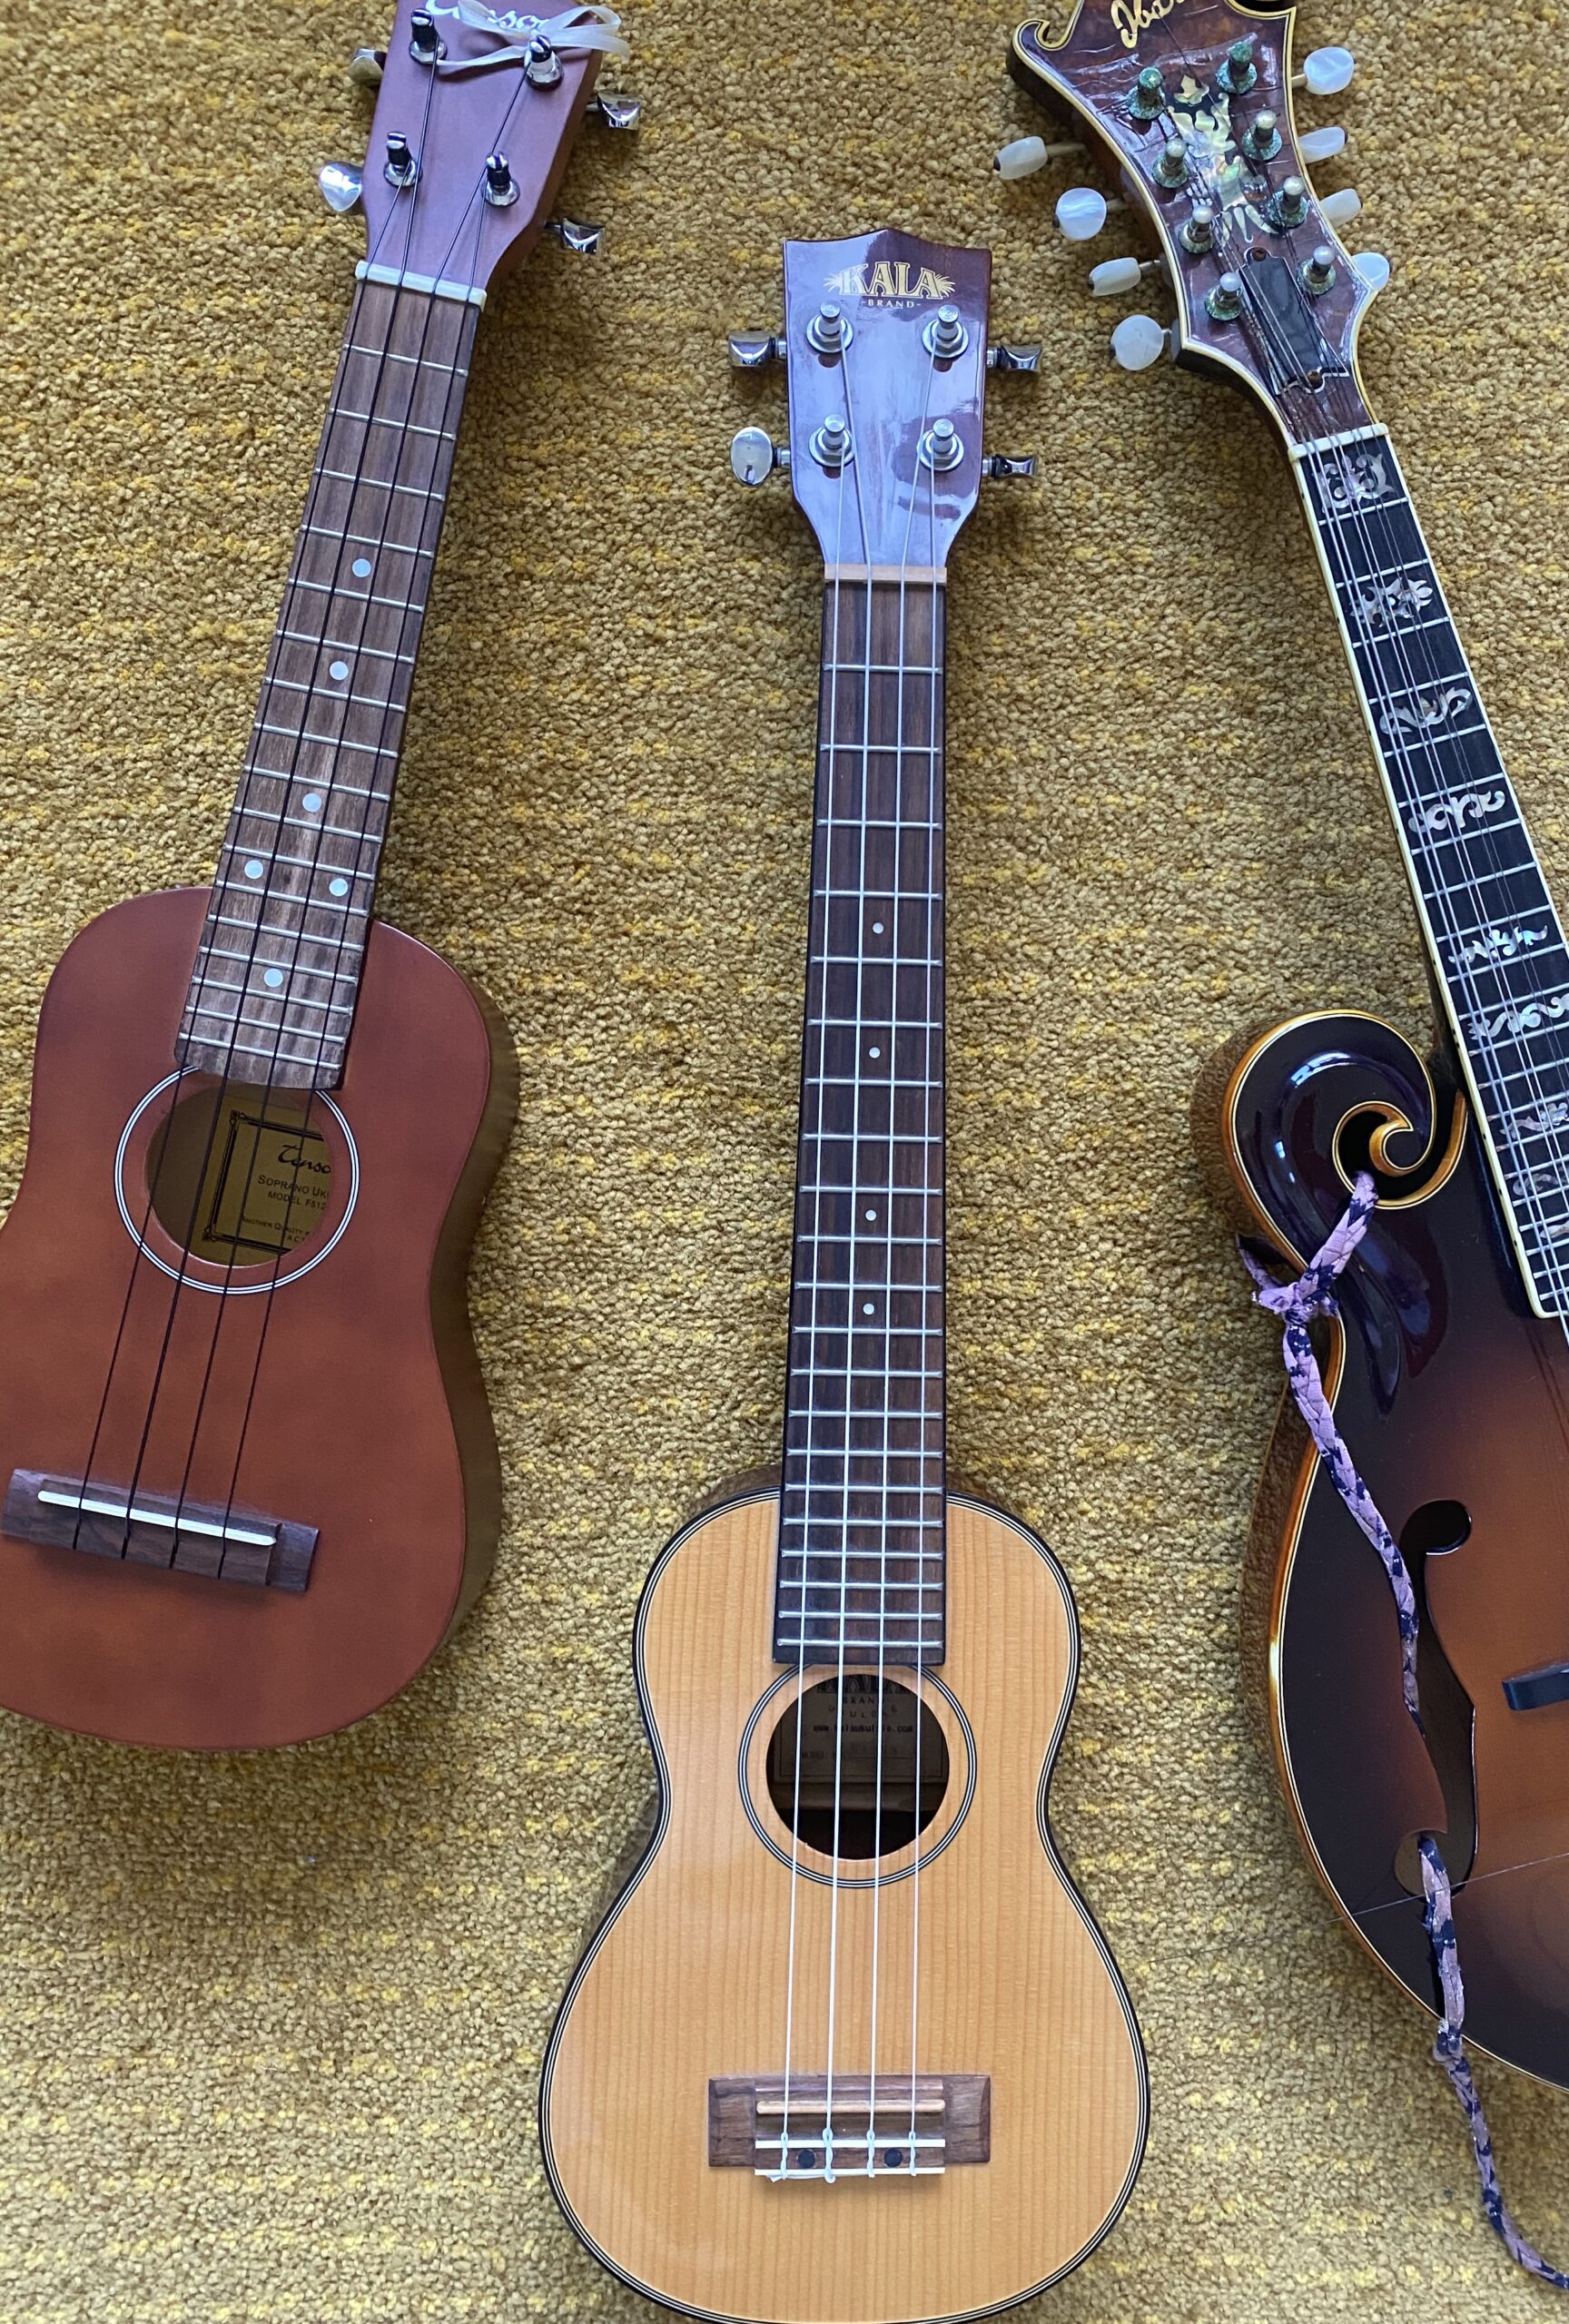 Two ukuleles and a mandolin with a carpeted background